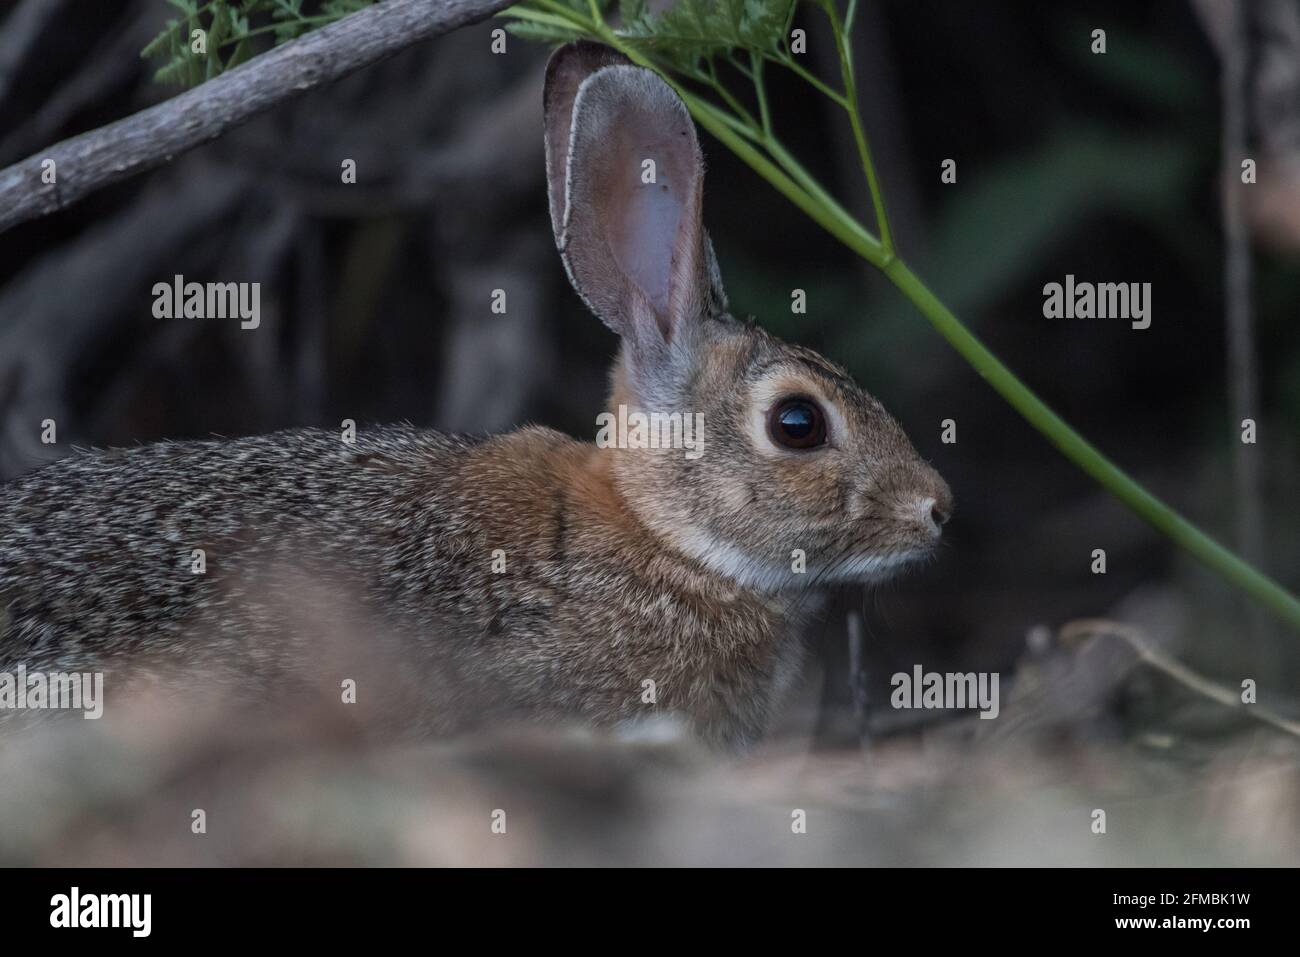 A desert cottontail rabbit (sylvilagus audubonii) from the region of Vernalis, California in Stanislaus county. Stock Photo